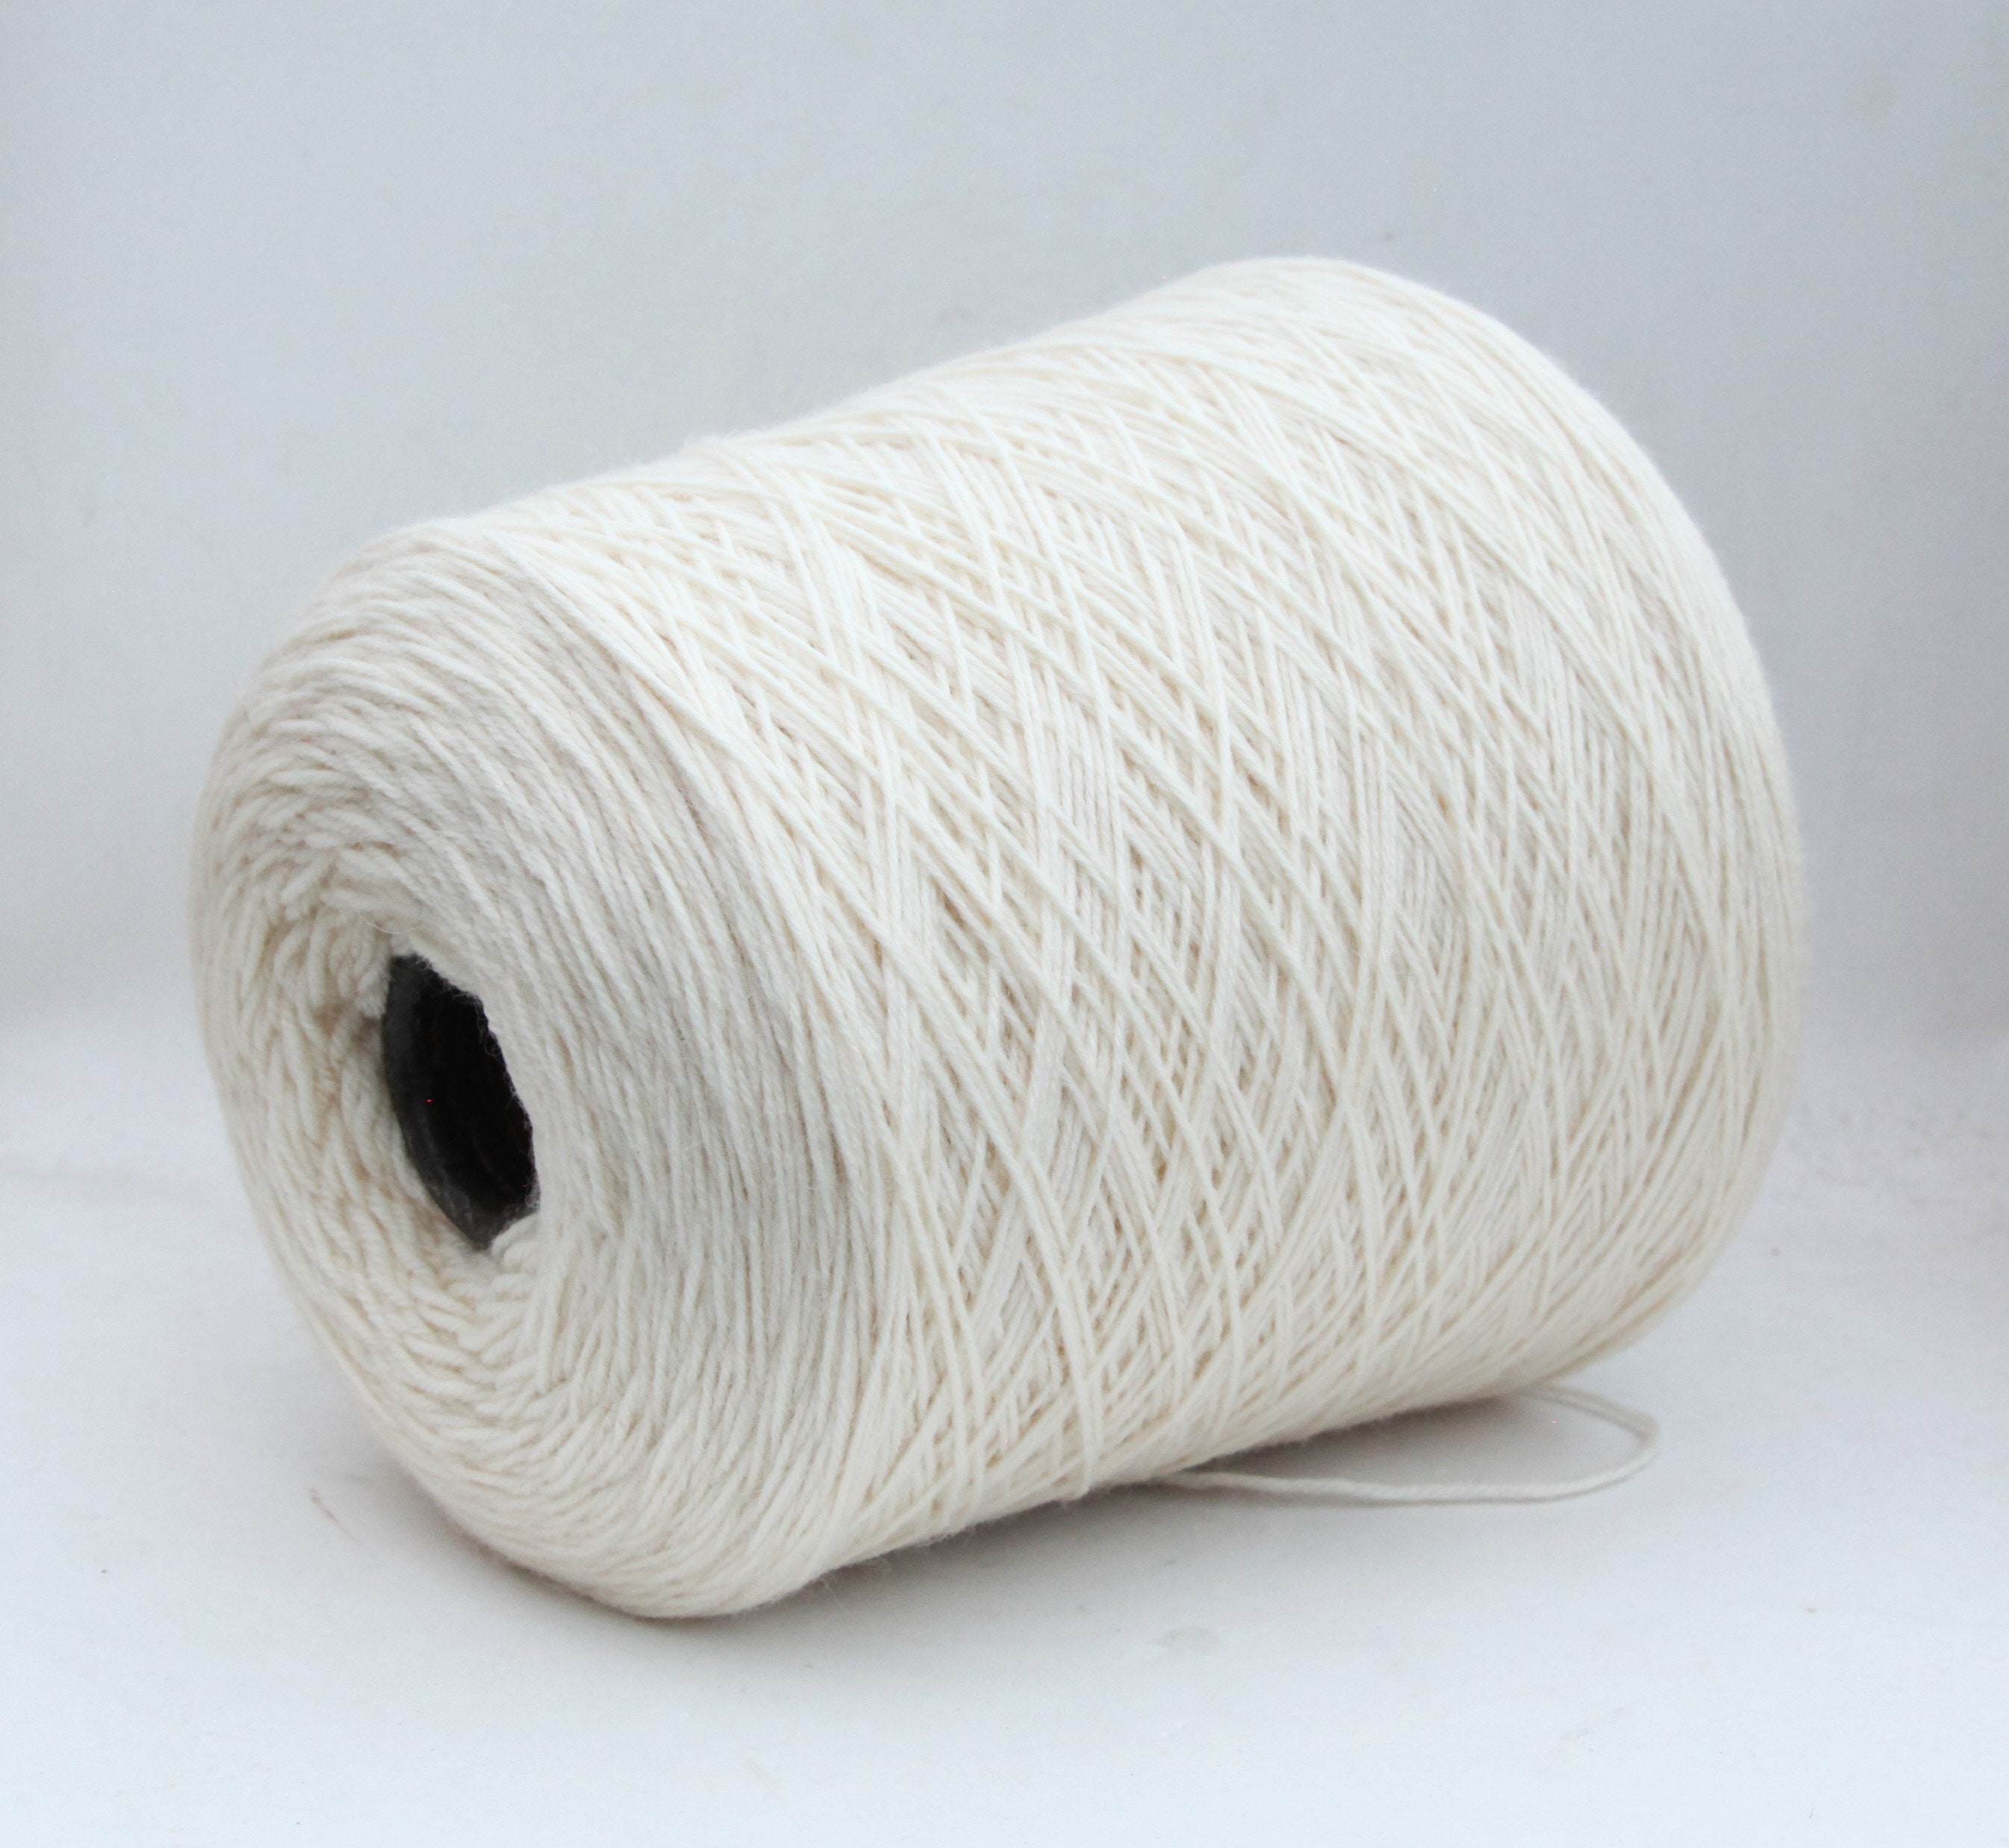 1kg of 100% cotton yarn on cone, light worsted/DK yarn for crochet, weaving  and knitting